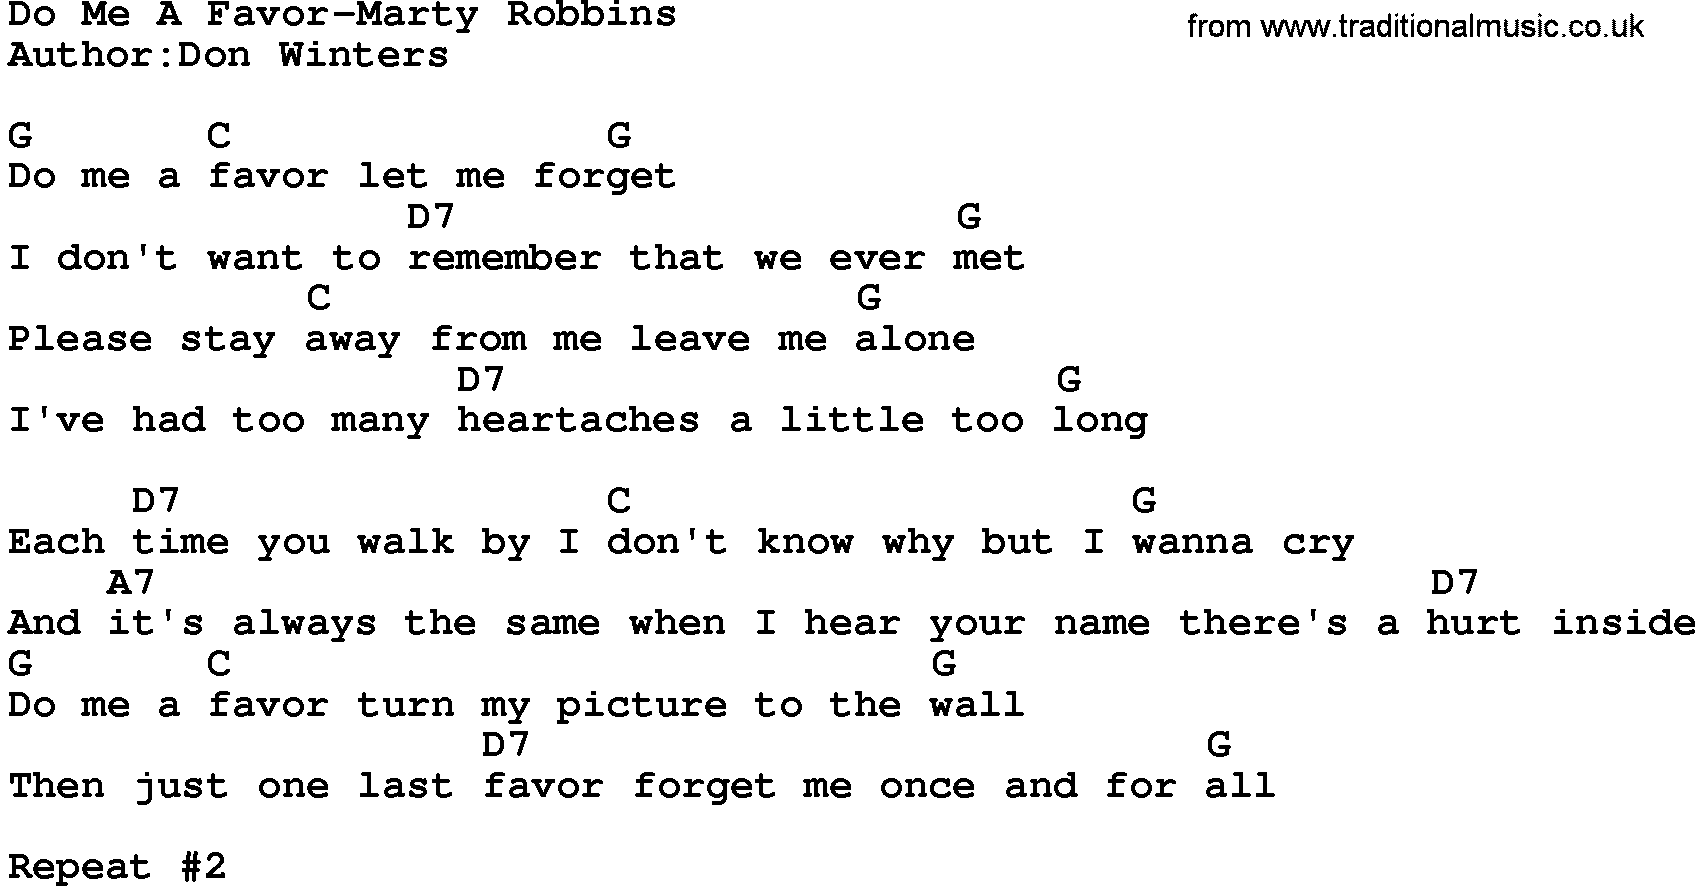 Country music song: Do Me A Favor-Marty Robbins lyrics and chords